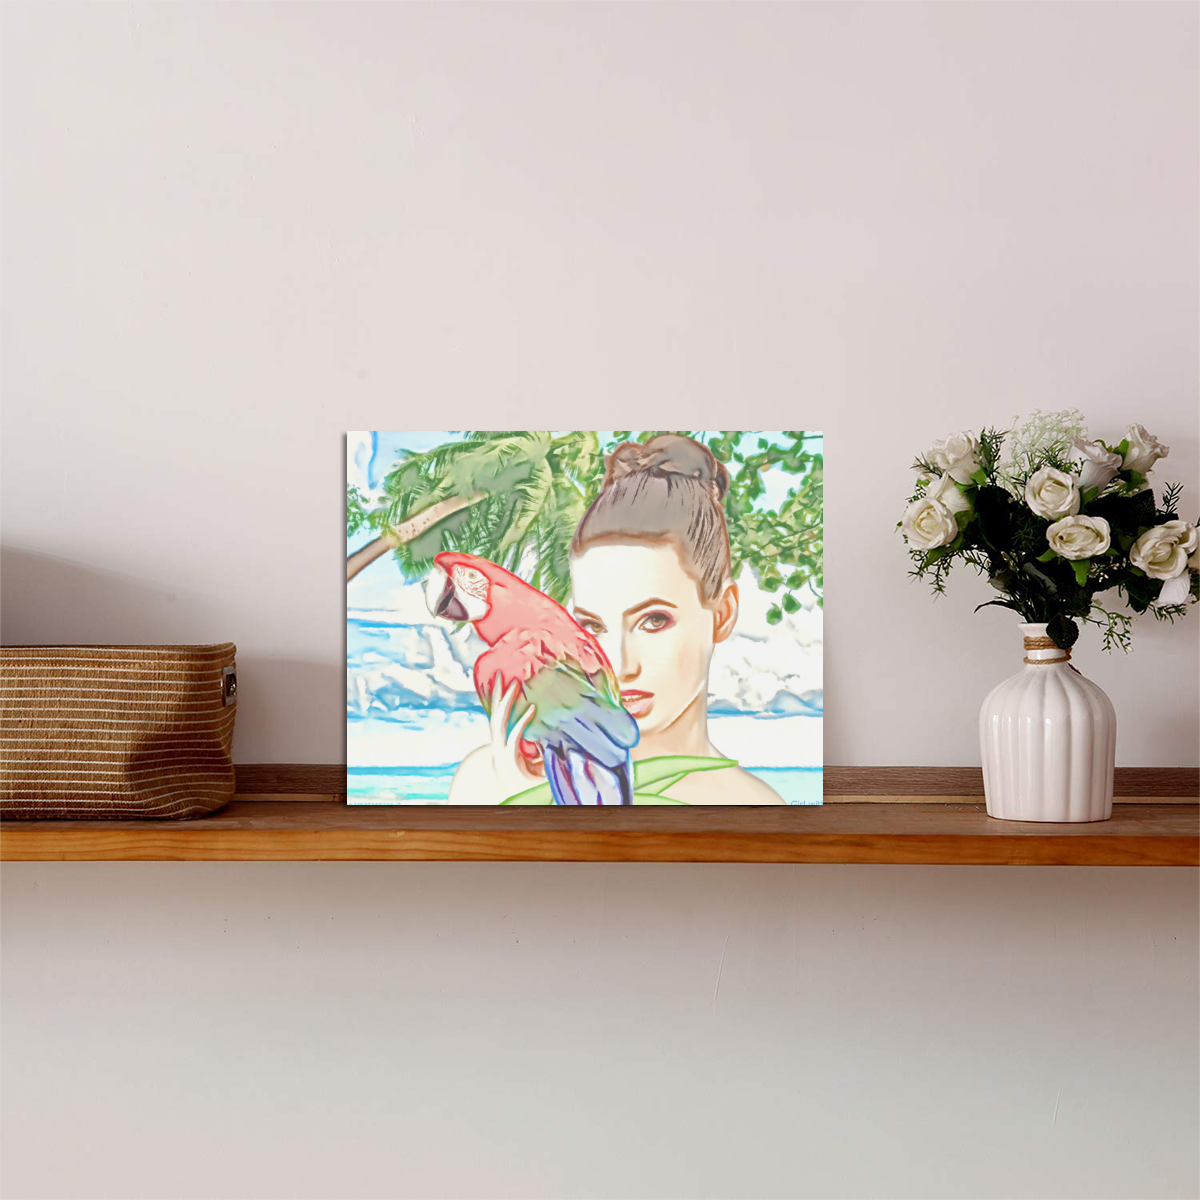 Girl with a parrot Photo Panel for Tabletop Display 8"x6"